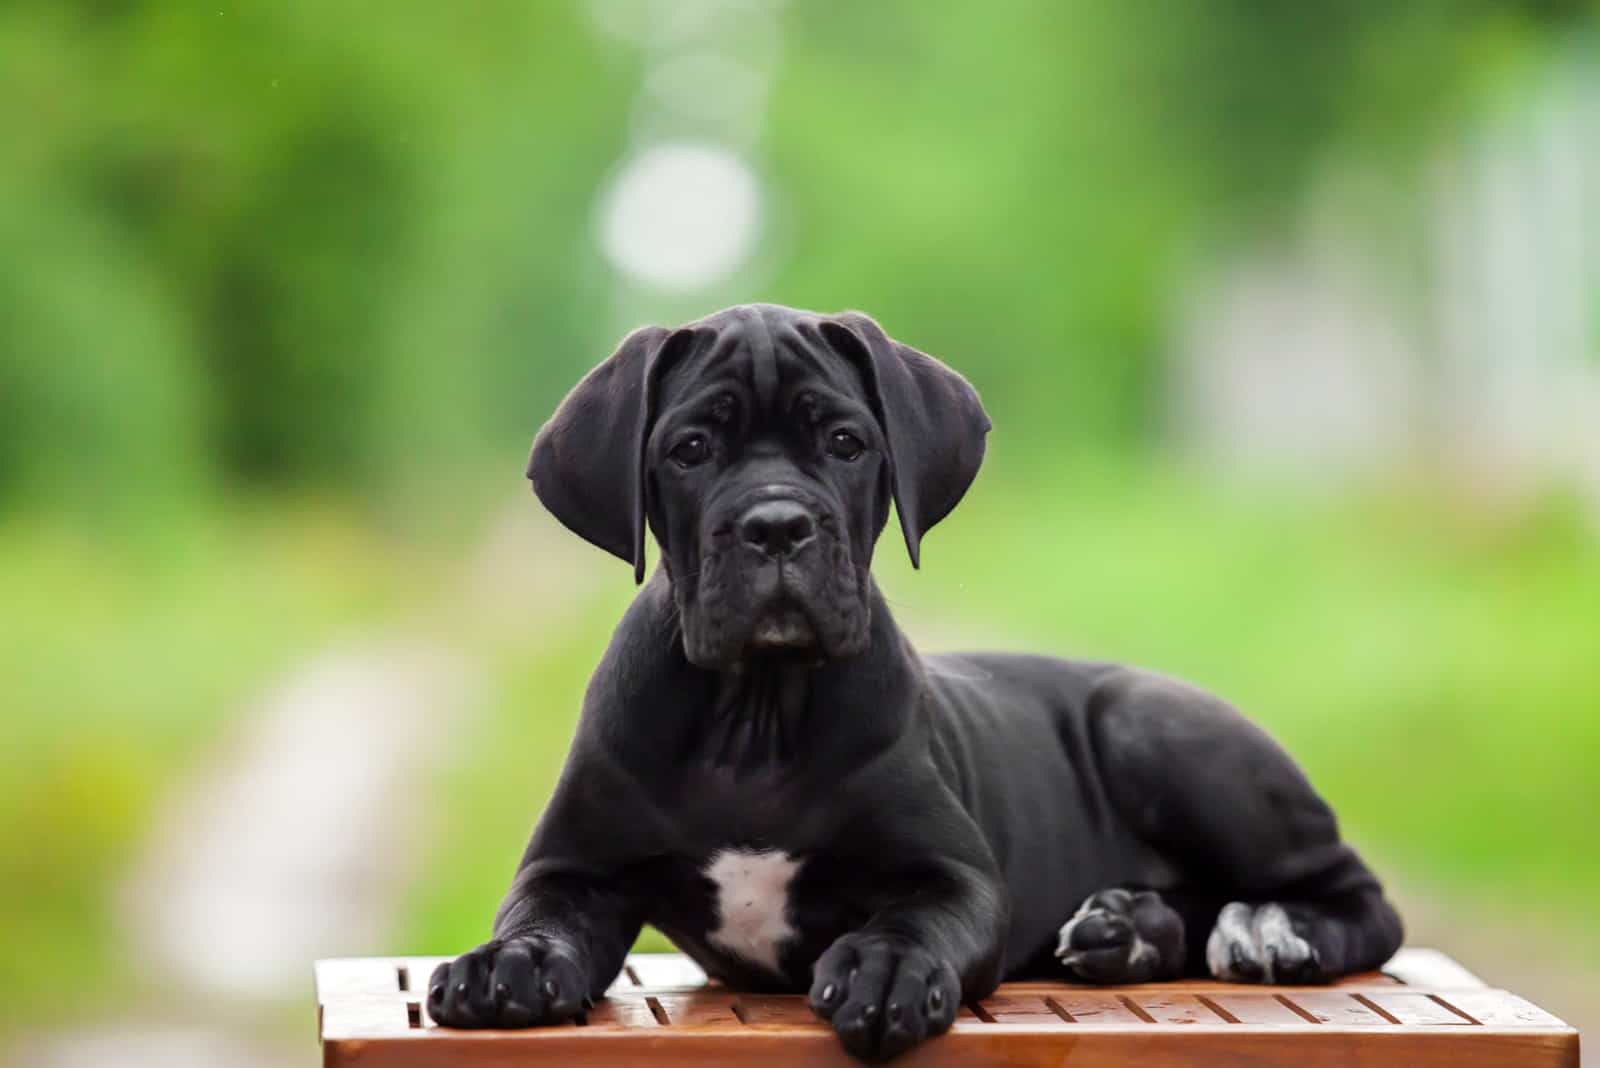 cane corso puppy lying outside looking at camera